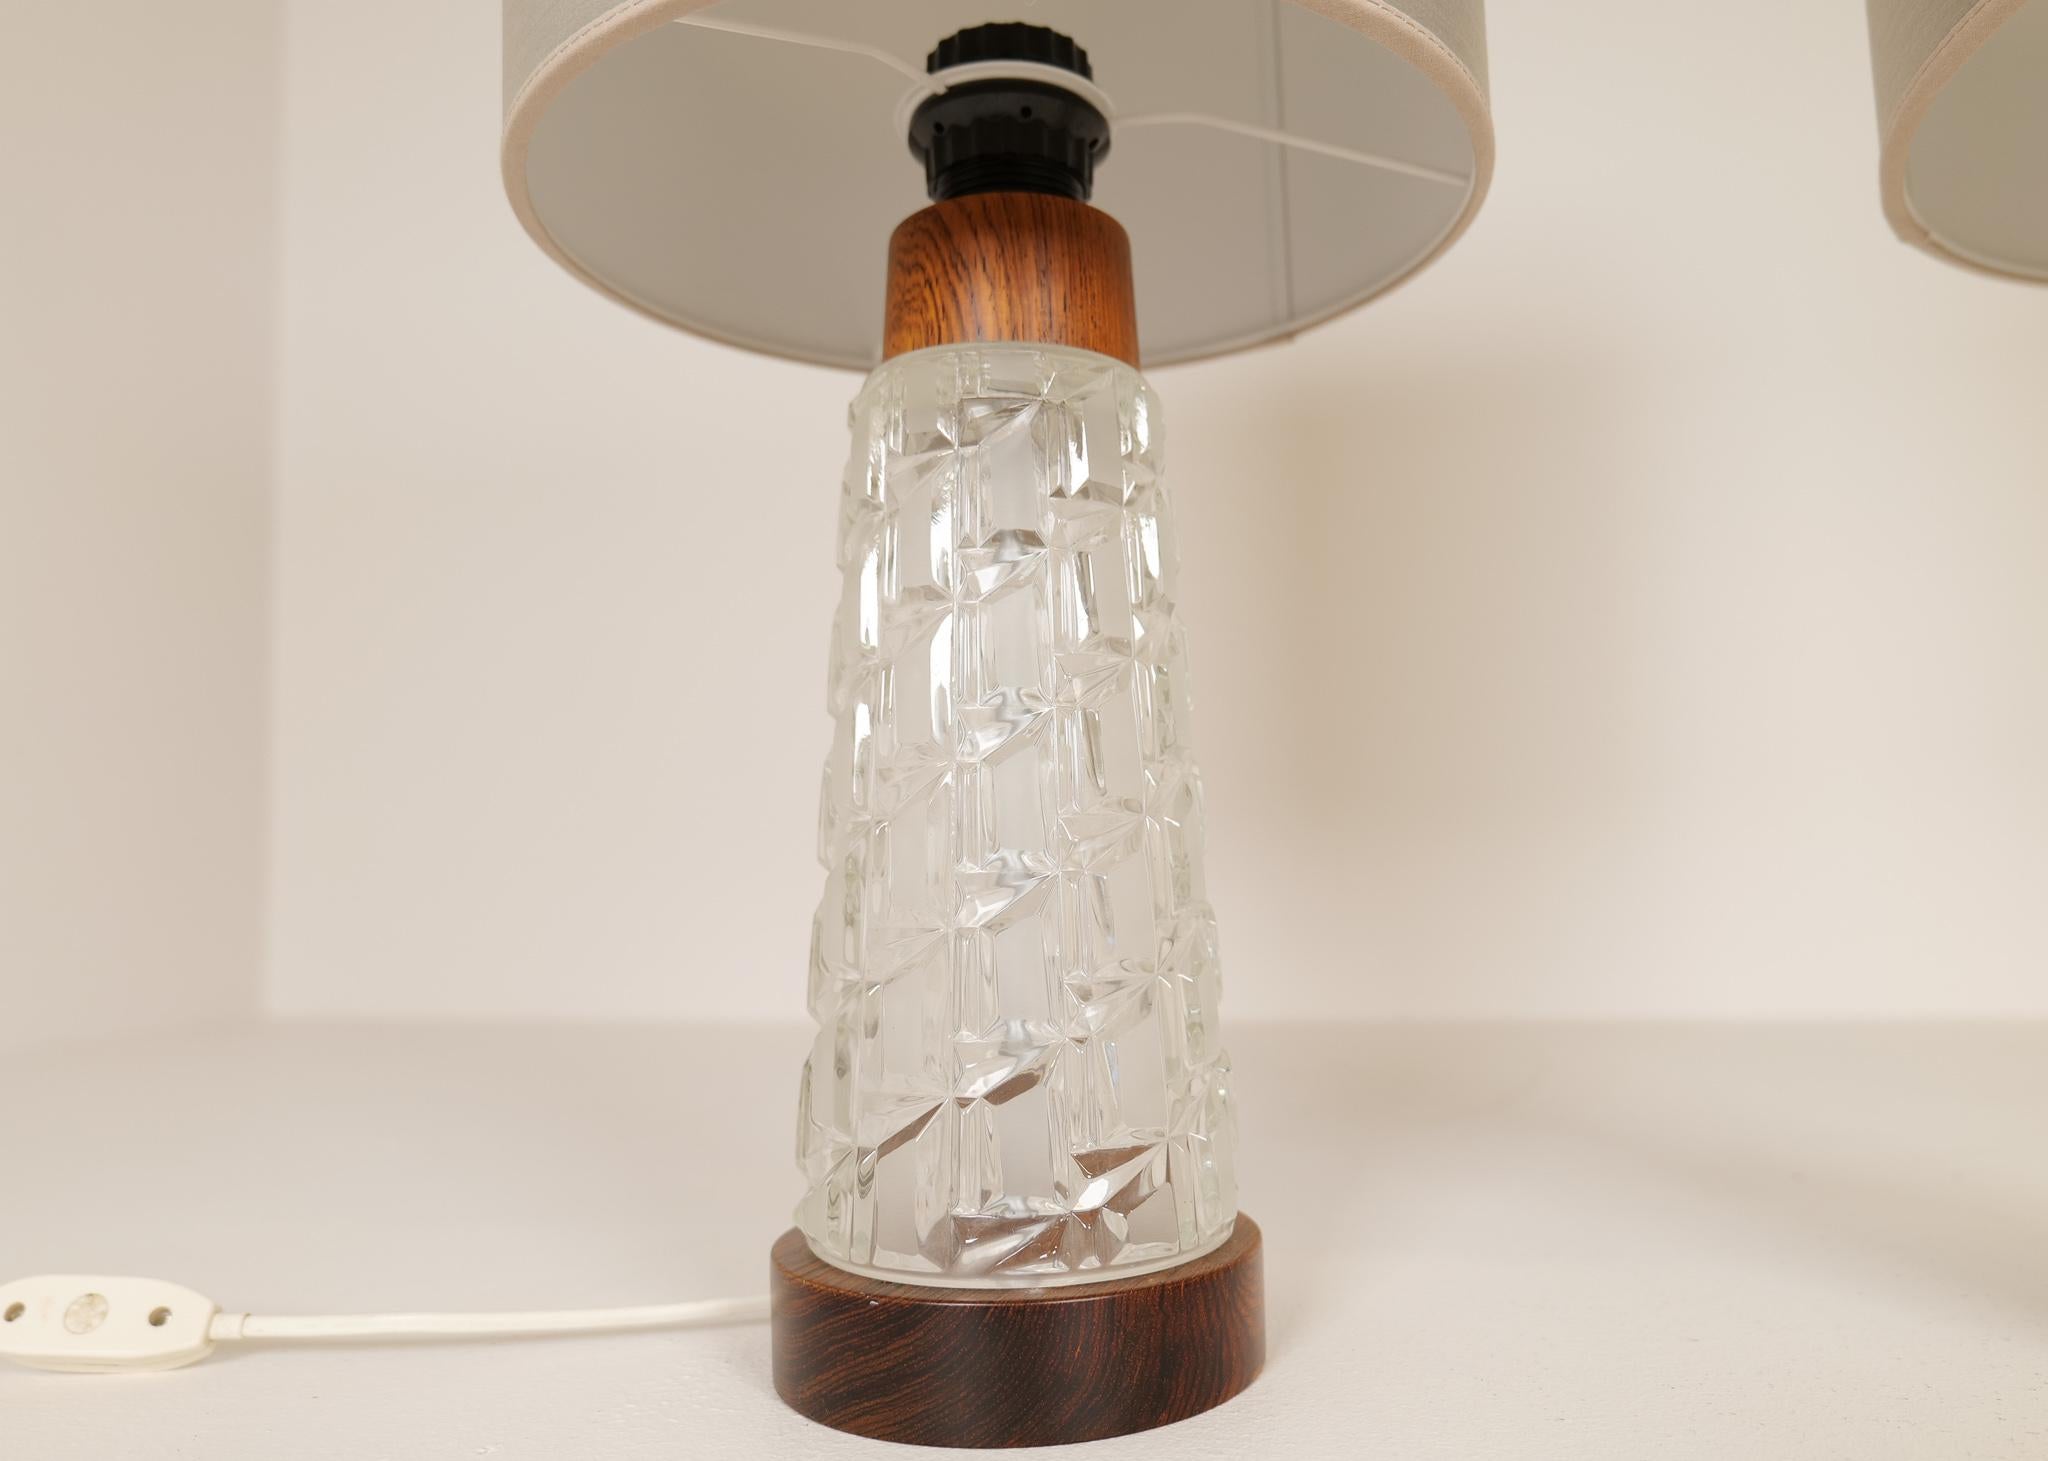 Mid-20th Century Midcentury Table Lamps Orrefors Teak and Glass Sweden For Sale